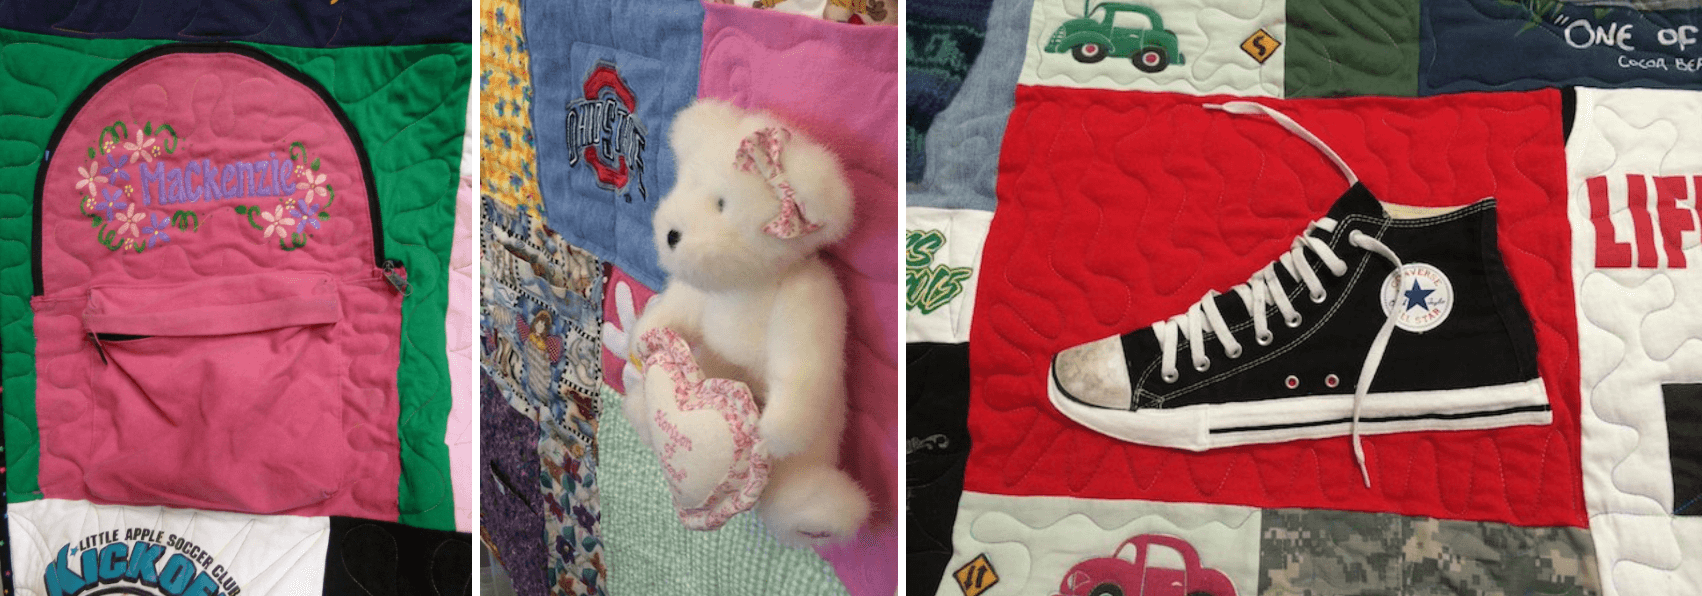 Examples of what can be used in a T-shirt quilt - Backpack, teddy bear & an shoe